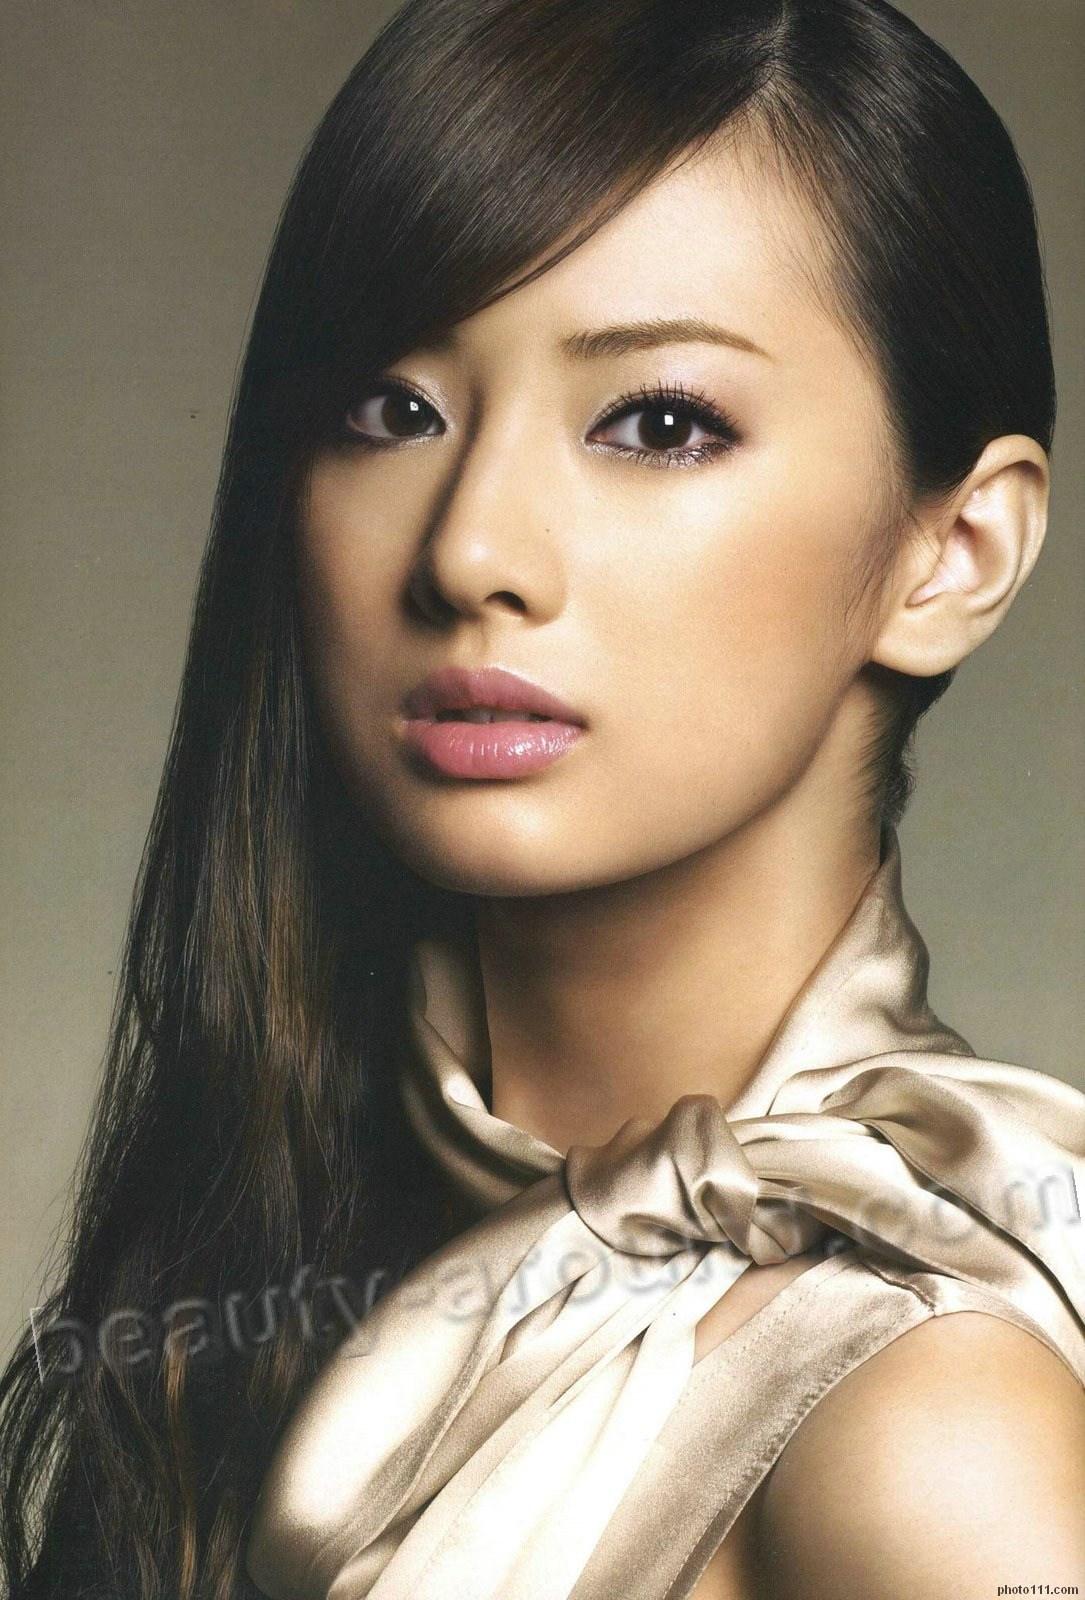 Top 20 Beautiful Japanese Women And Models. Photo Gallery